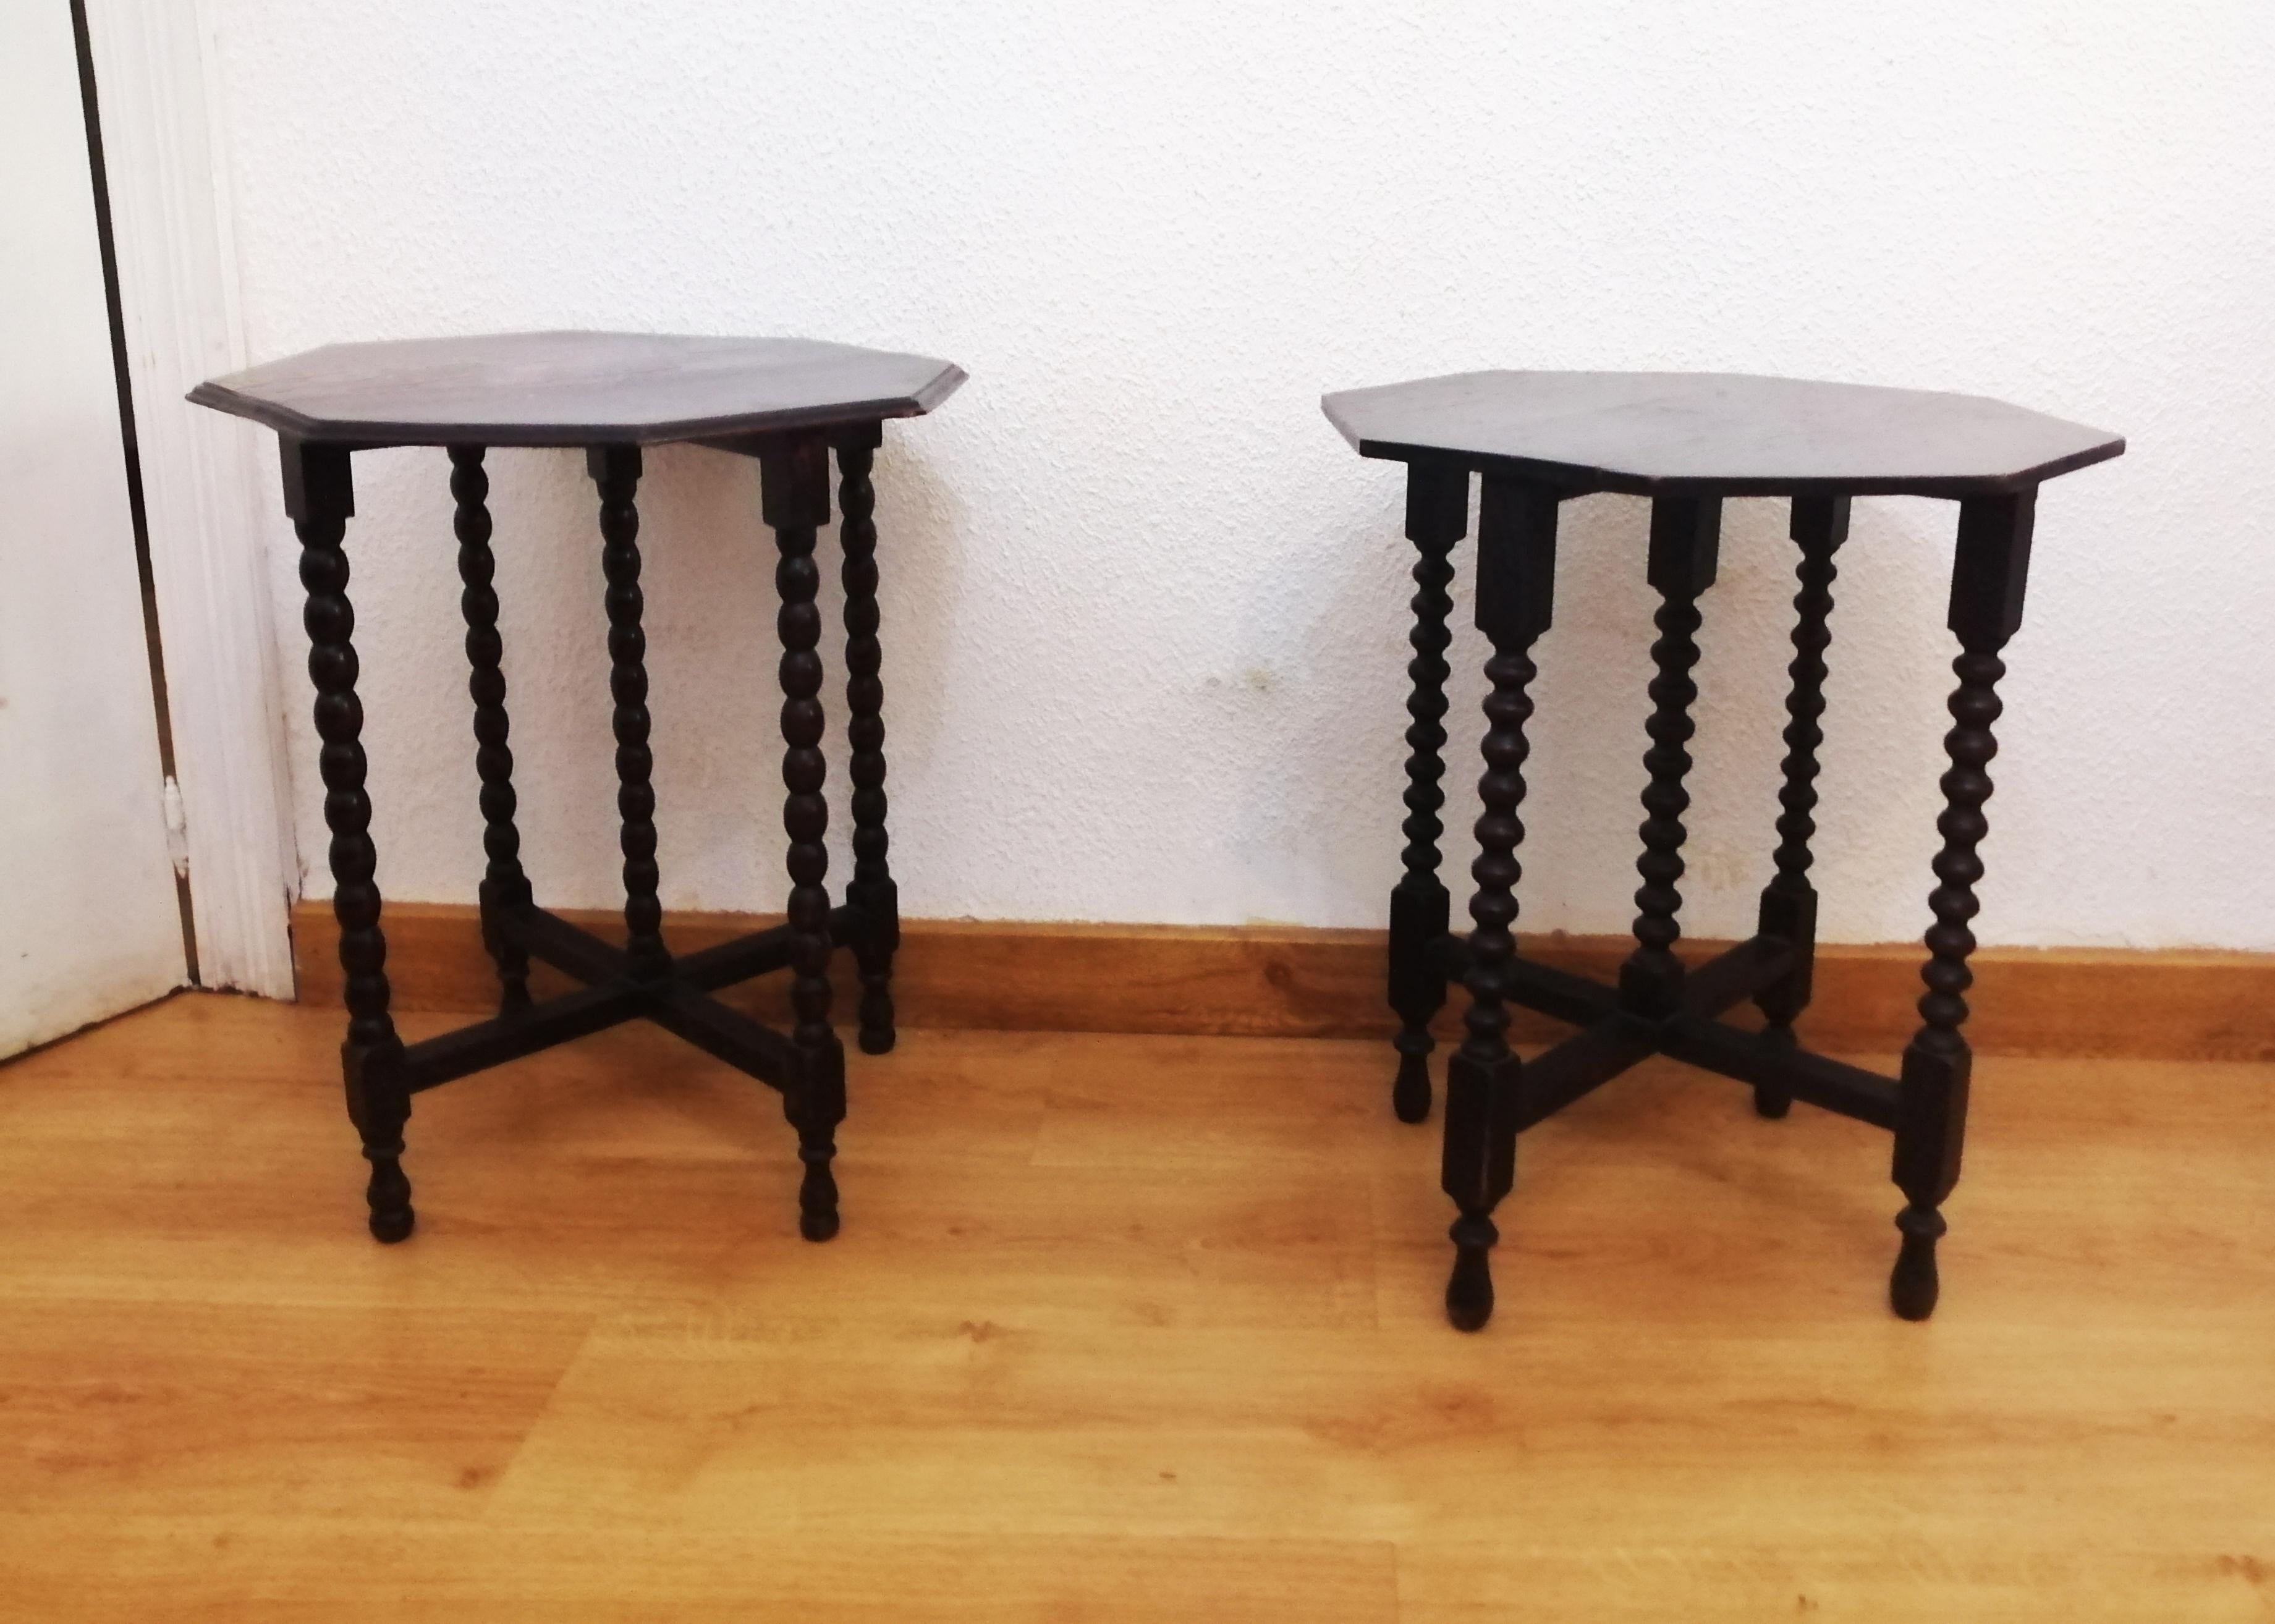 Spanish Pair of Antique Bobbin Turned Side End Wine Tables from the 19th Century